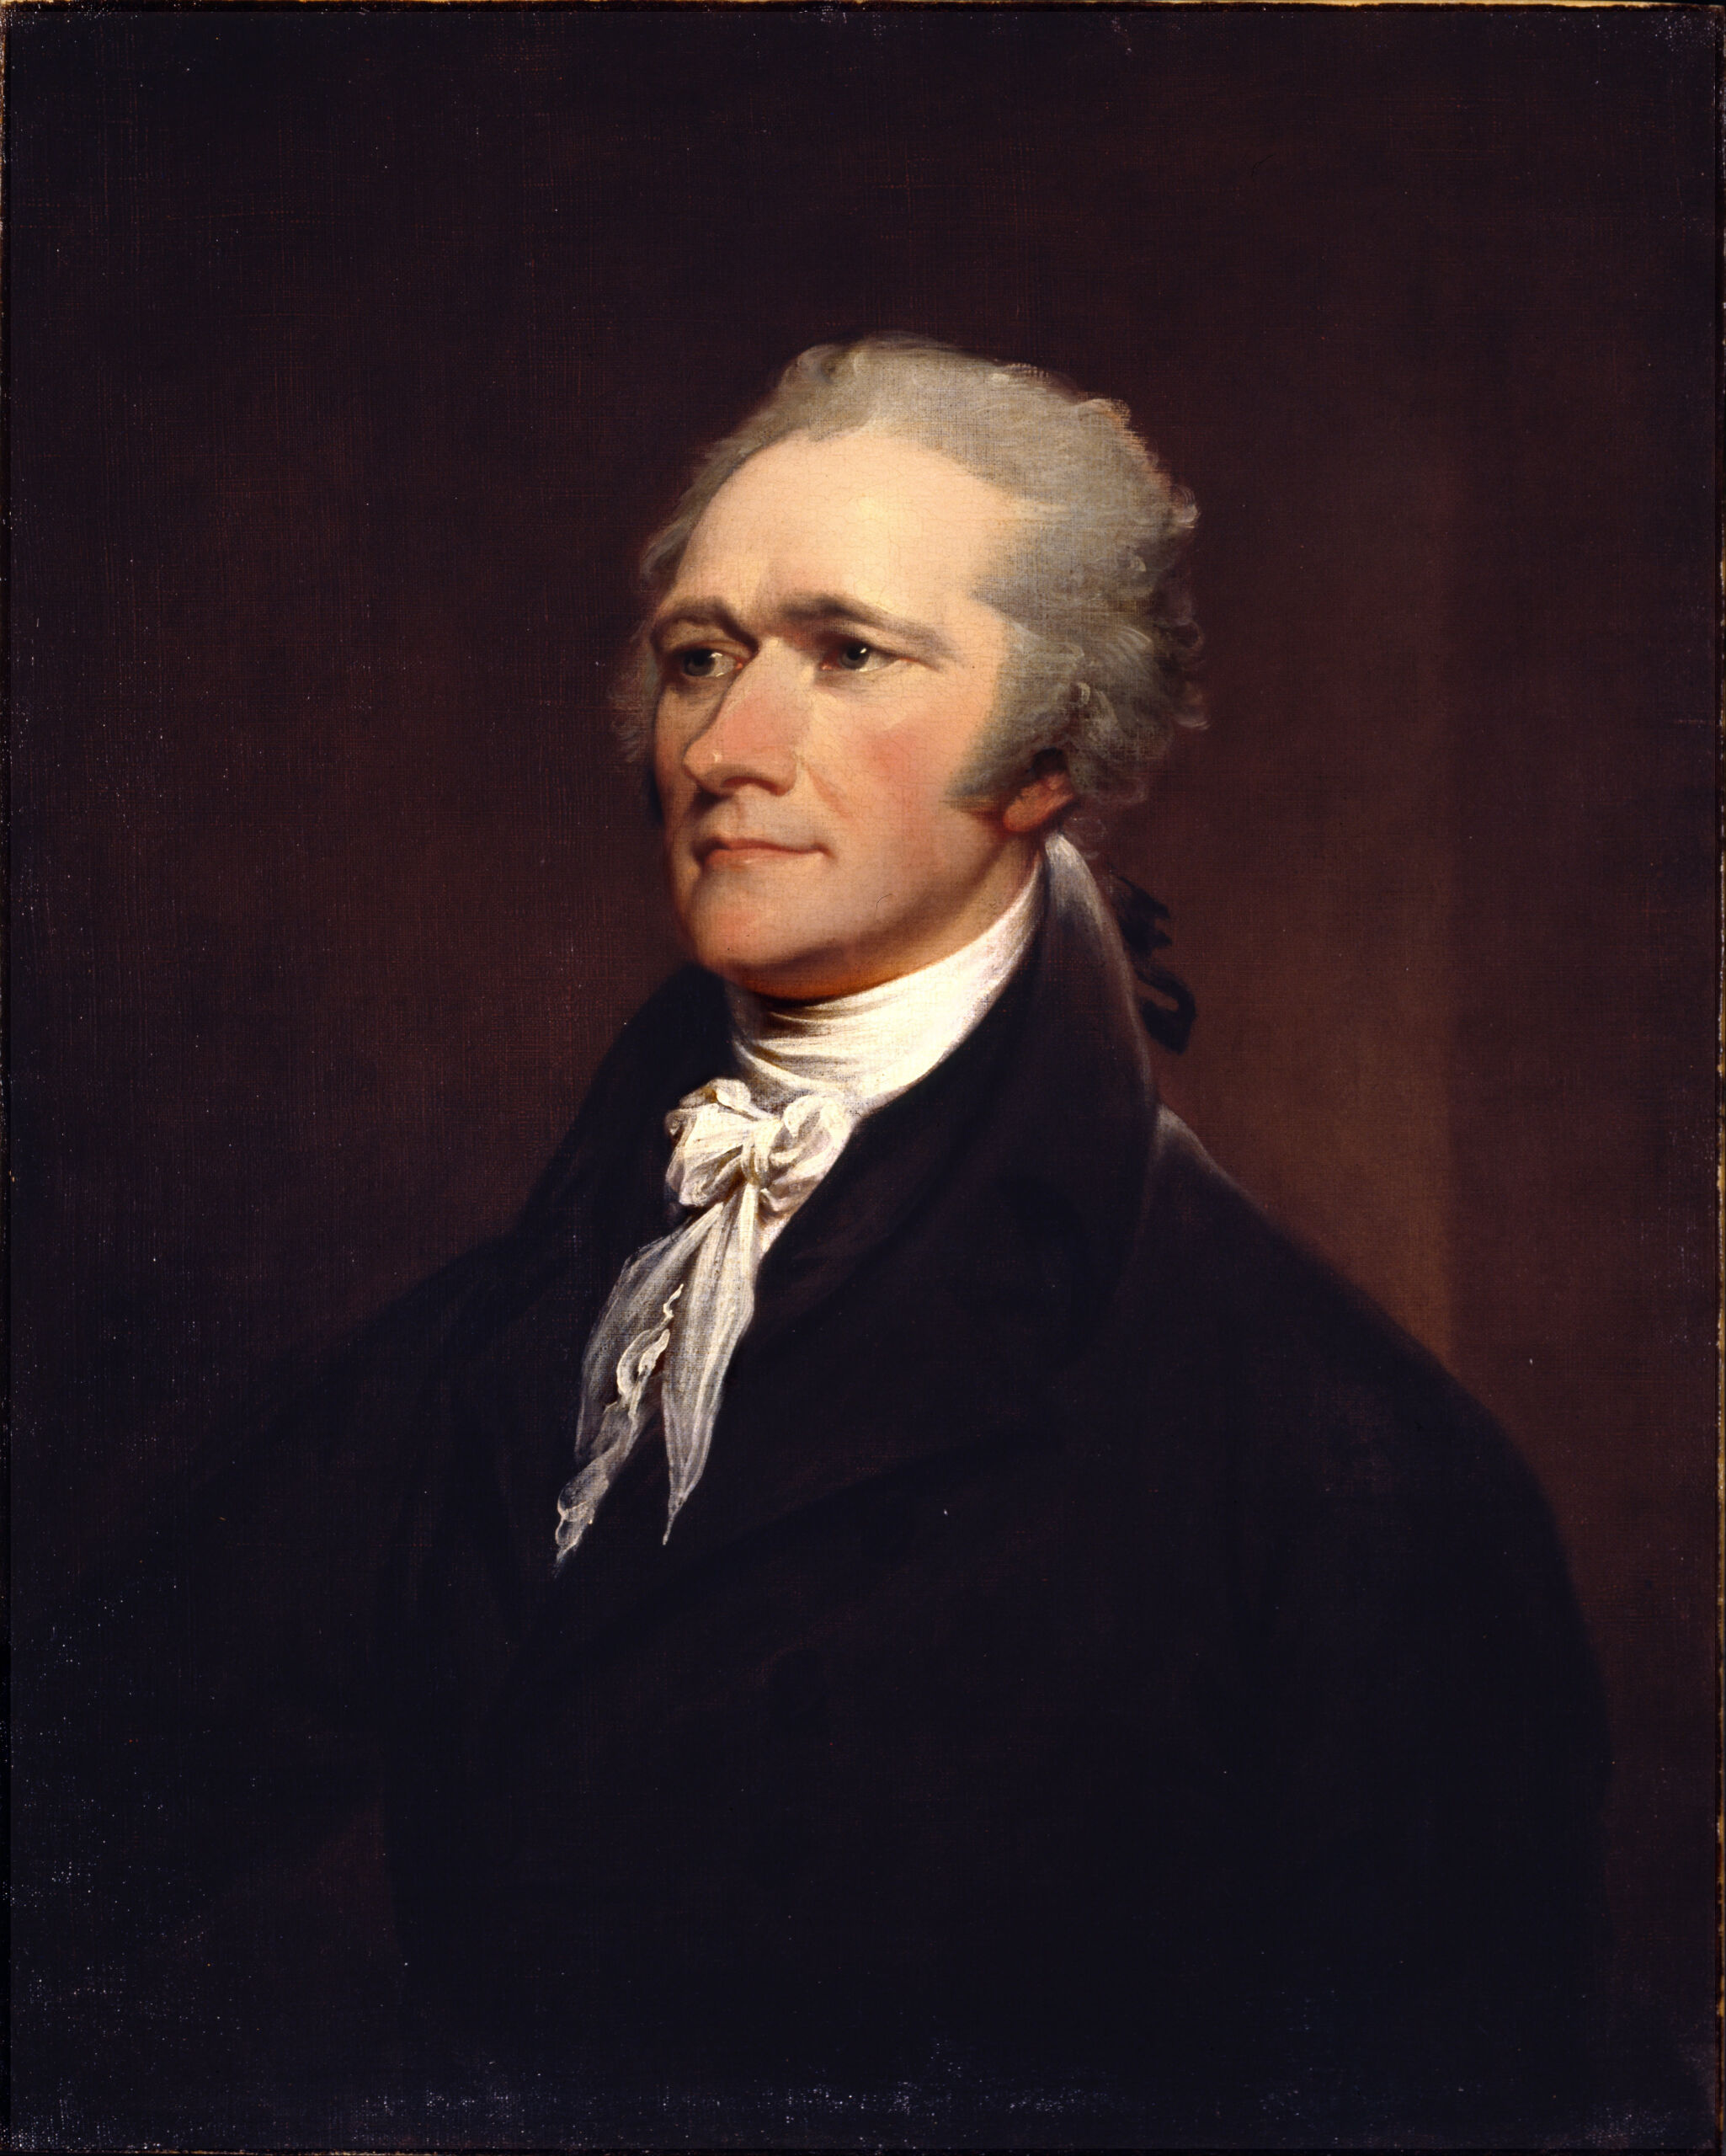 Alexander Hamilton: Why is He so Popular Today?